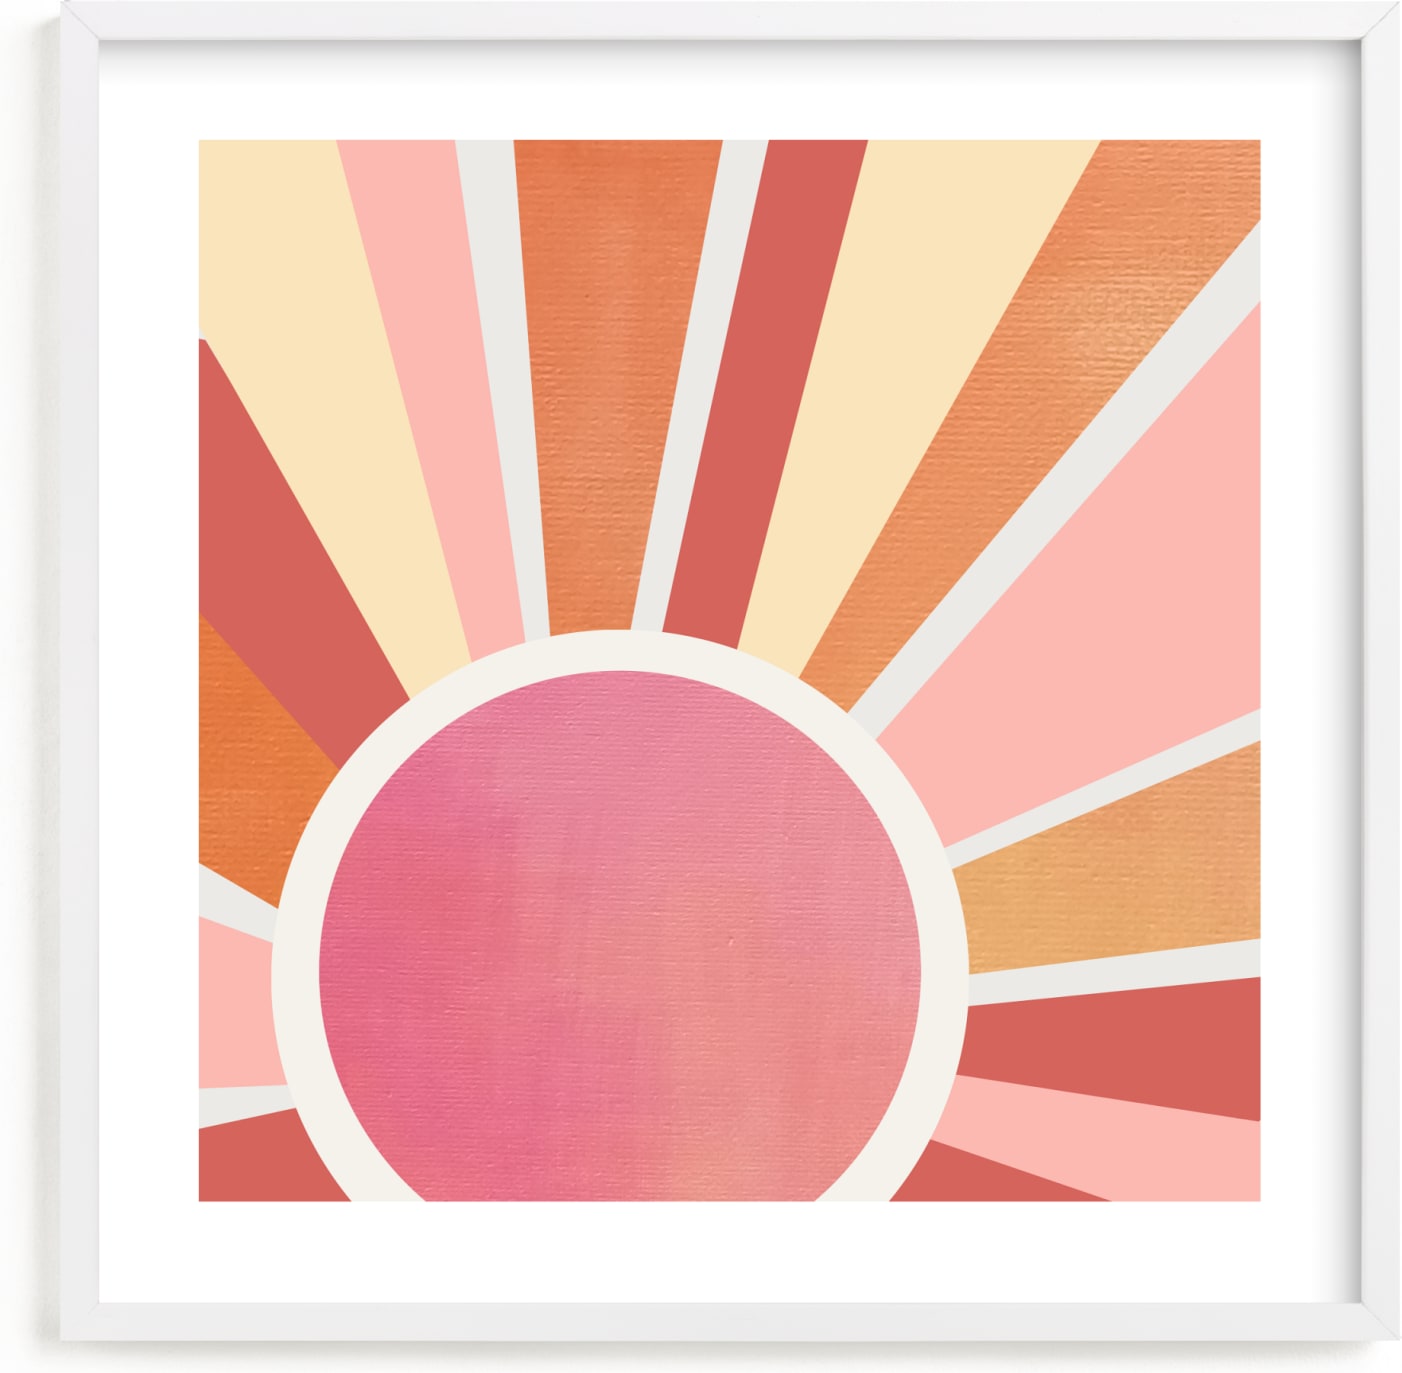 This is a white art by AlisonJerry called ombre sun.